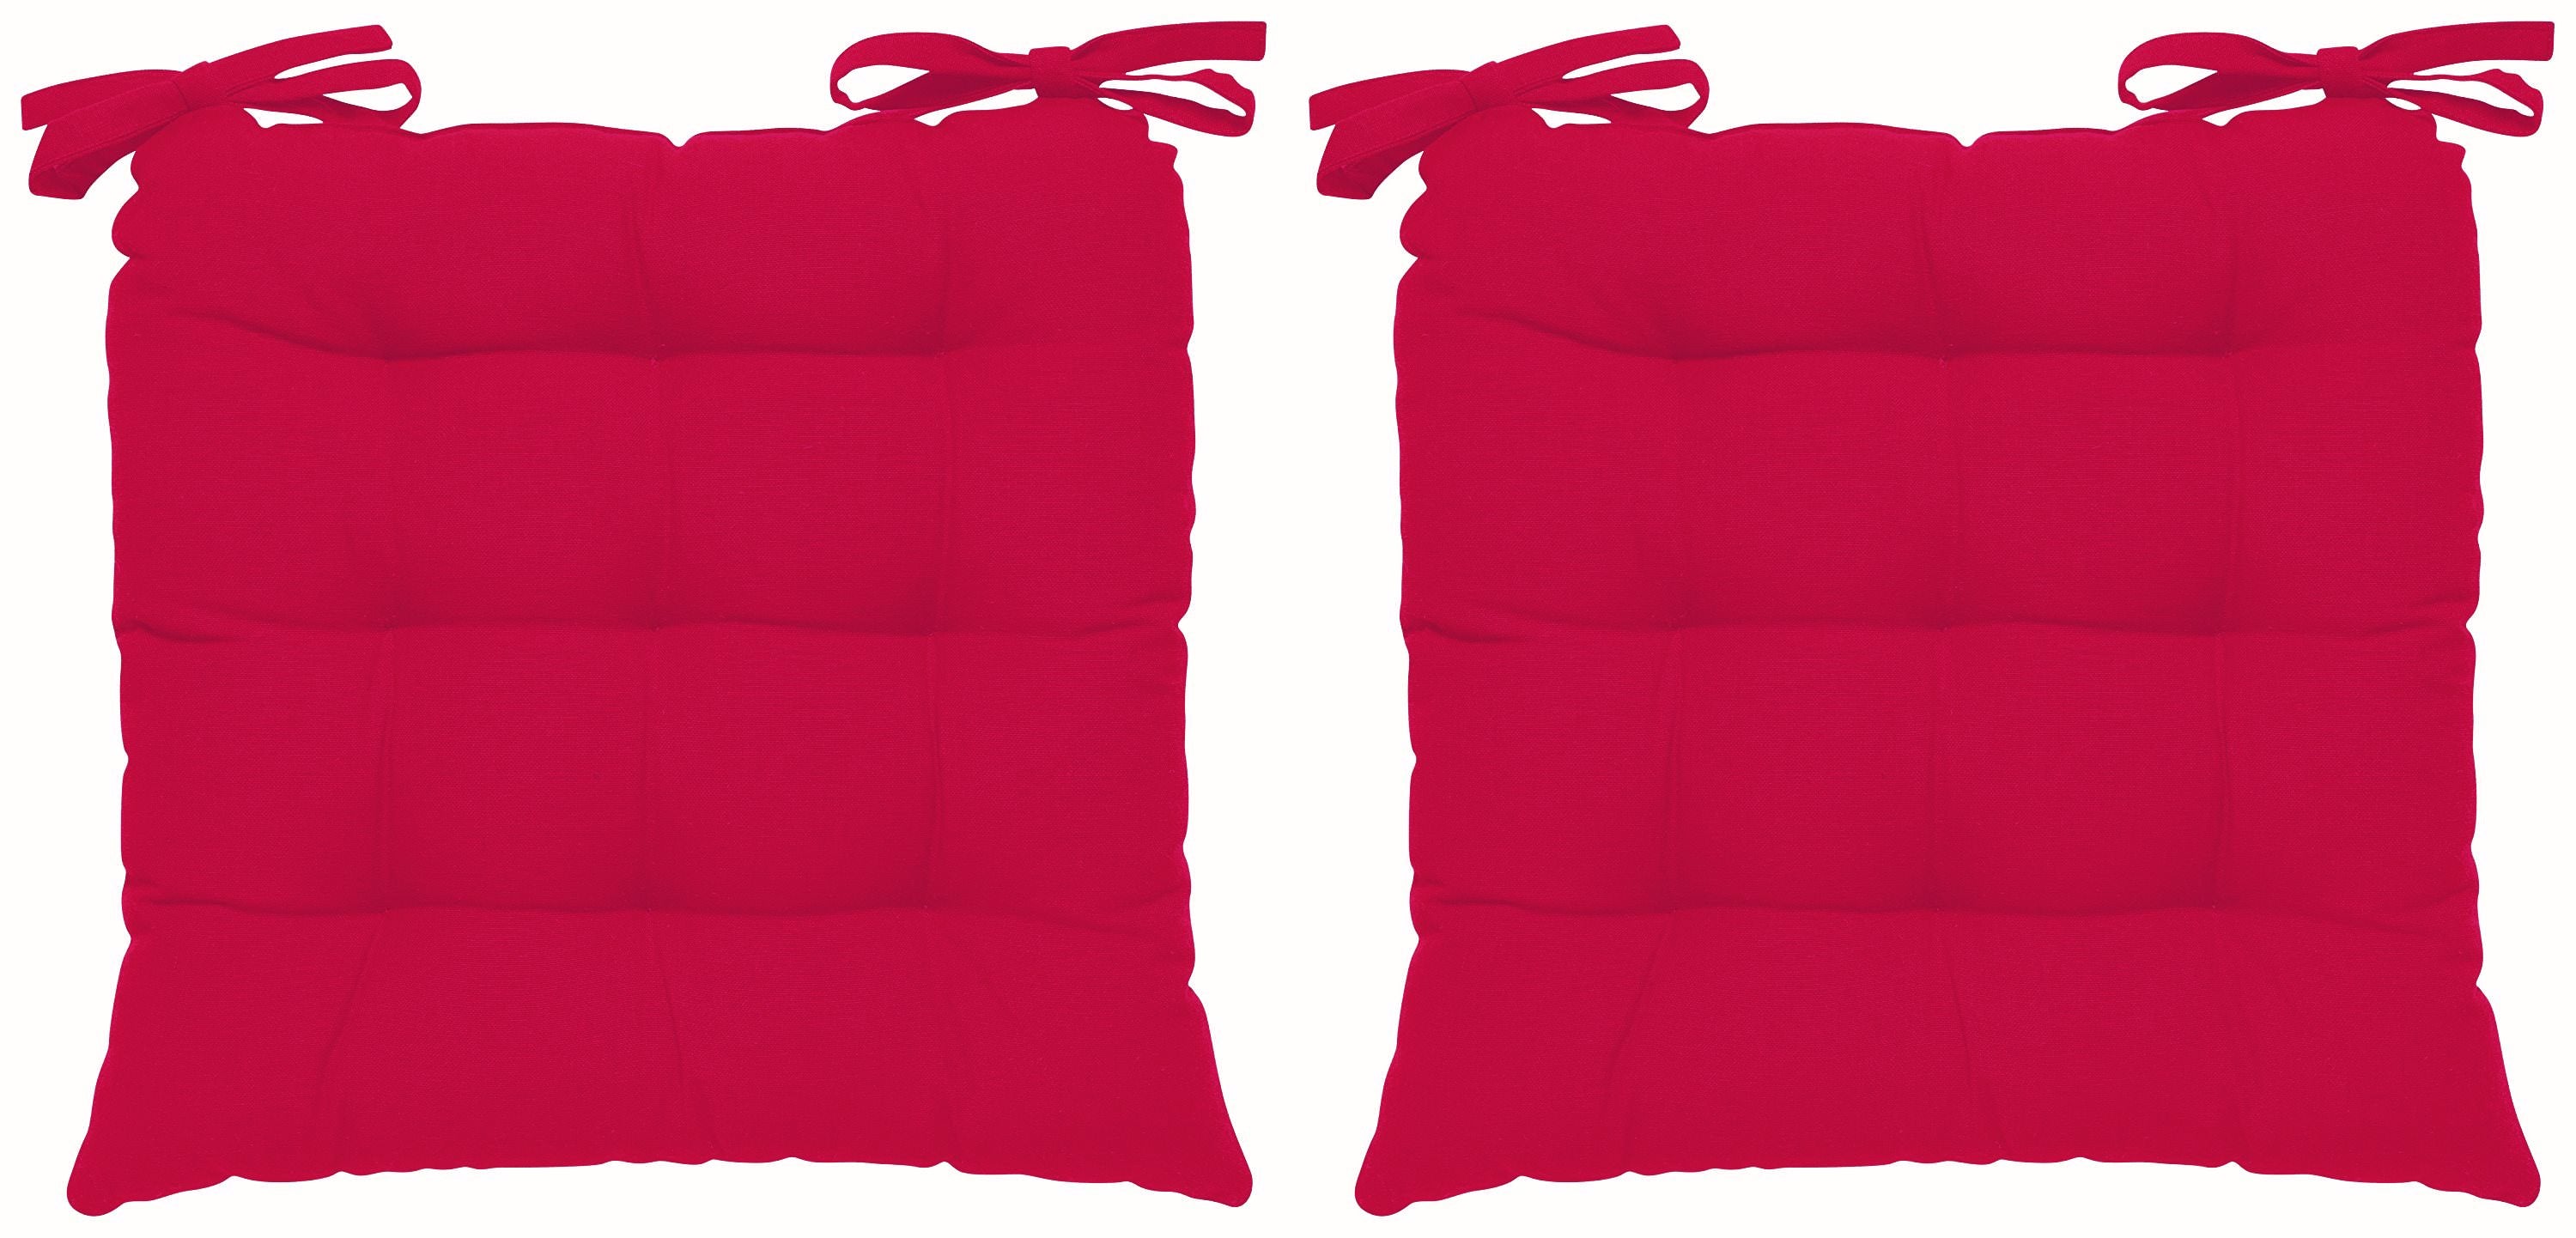 Encasa Homes Chairpad 40x40cm (2pc pack) - Dyed Cotton Canvas Filled Cushion - Fuchsia Pink